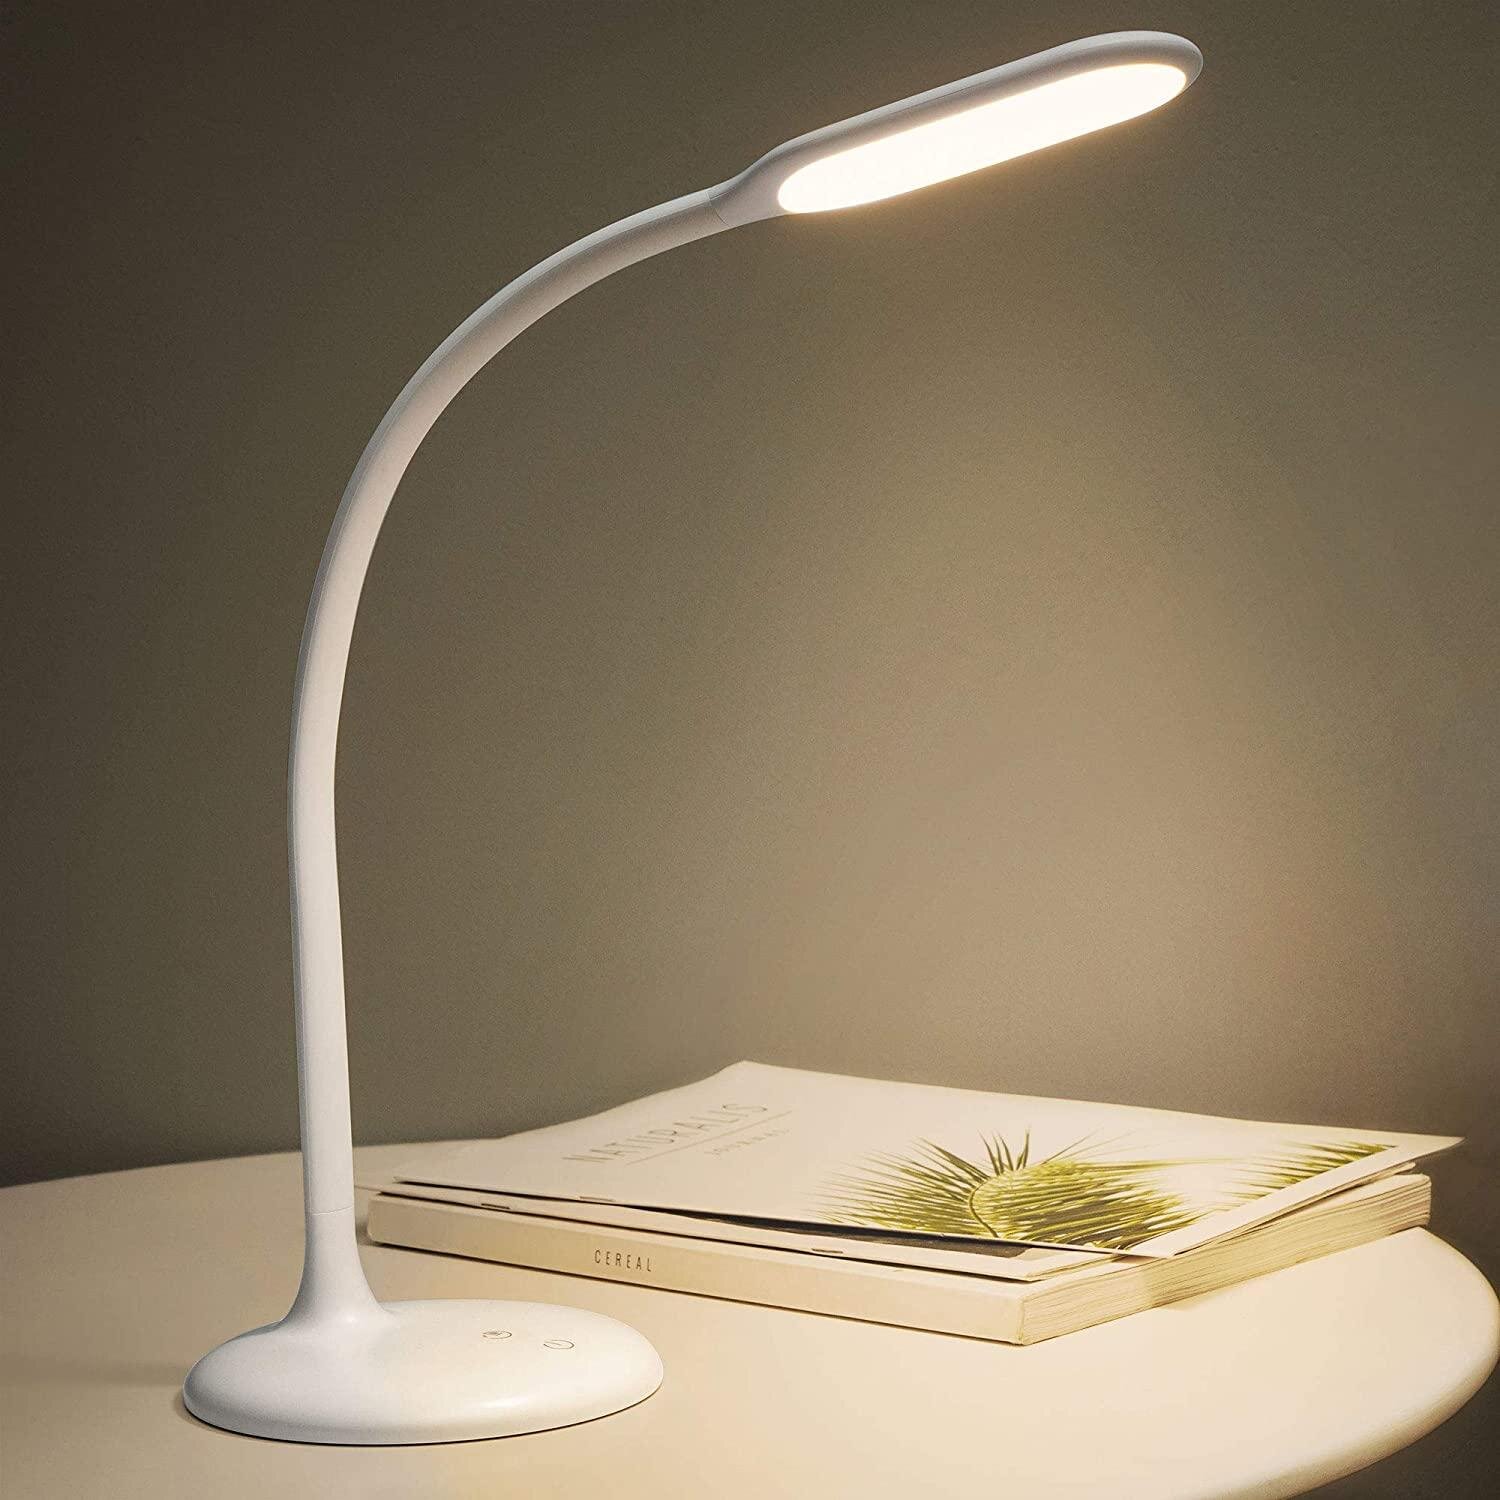 Flexible LED Reading Light Dimmable Bedside Desk Top Table Lamp Battery Operated